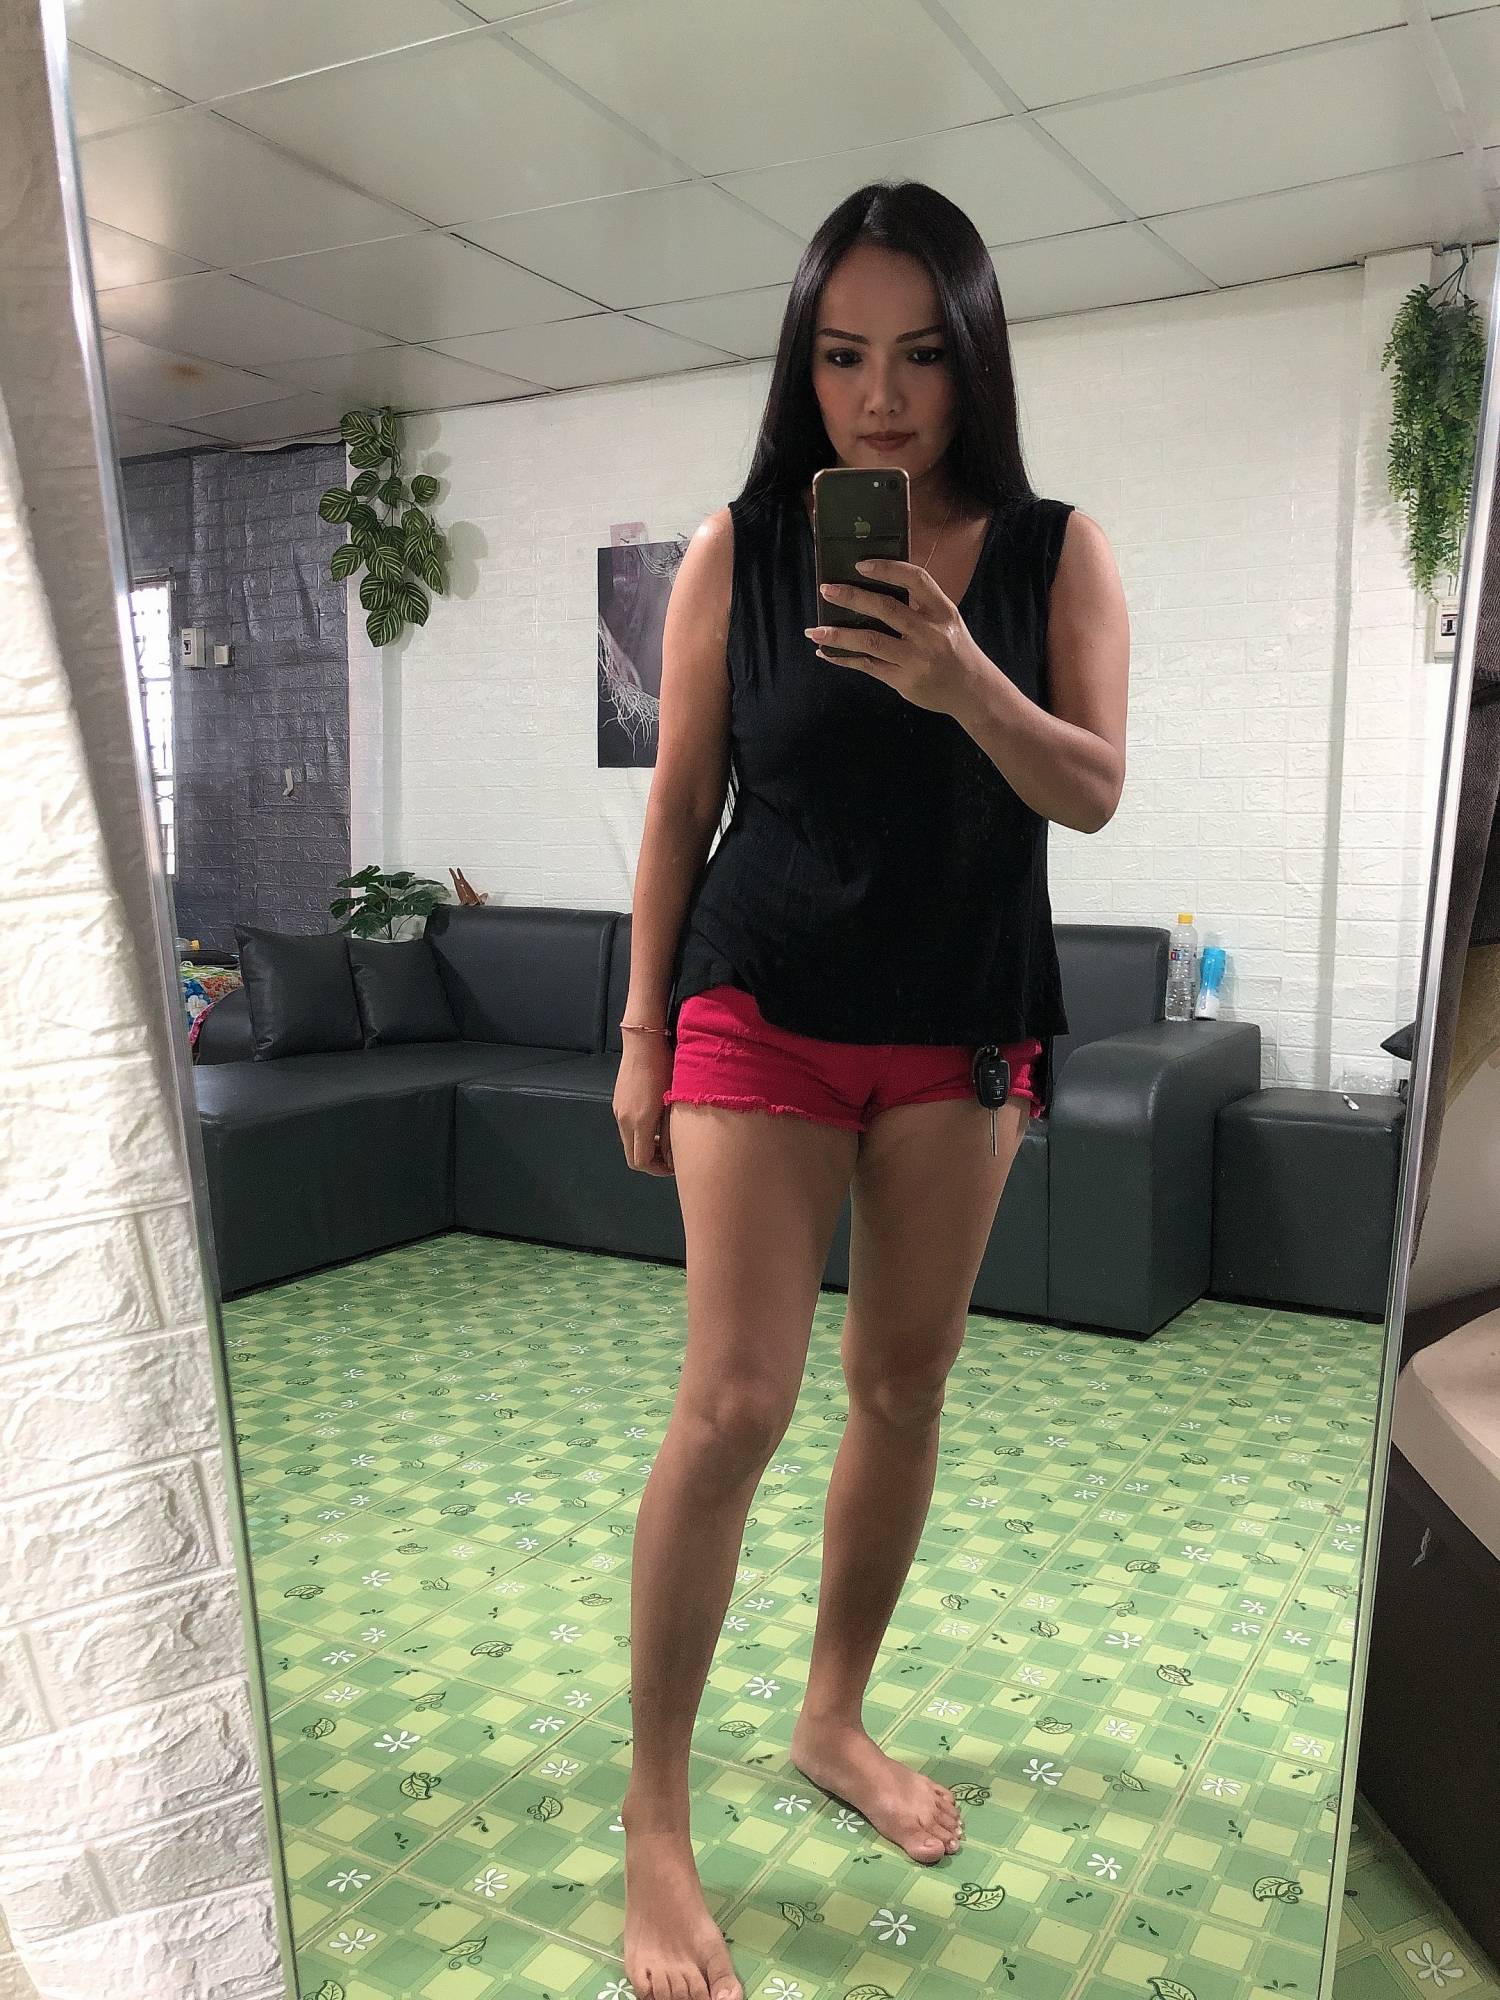 Tara's personal blog photo 1 added Tuesday the 29th of June 2021